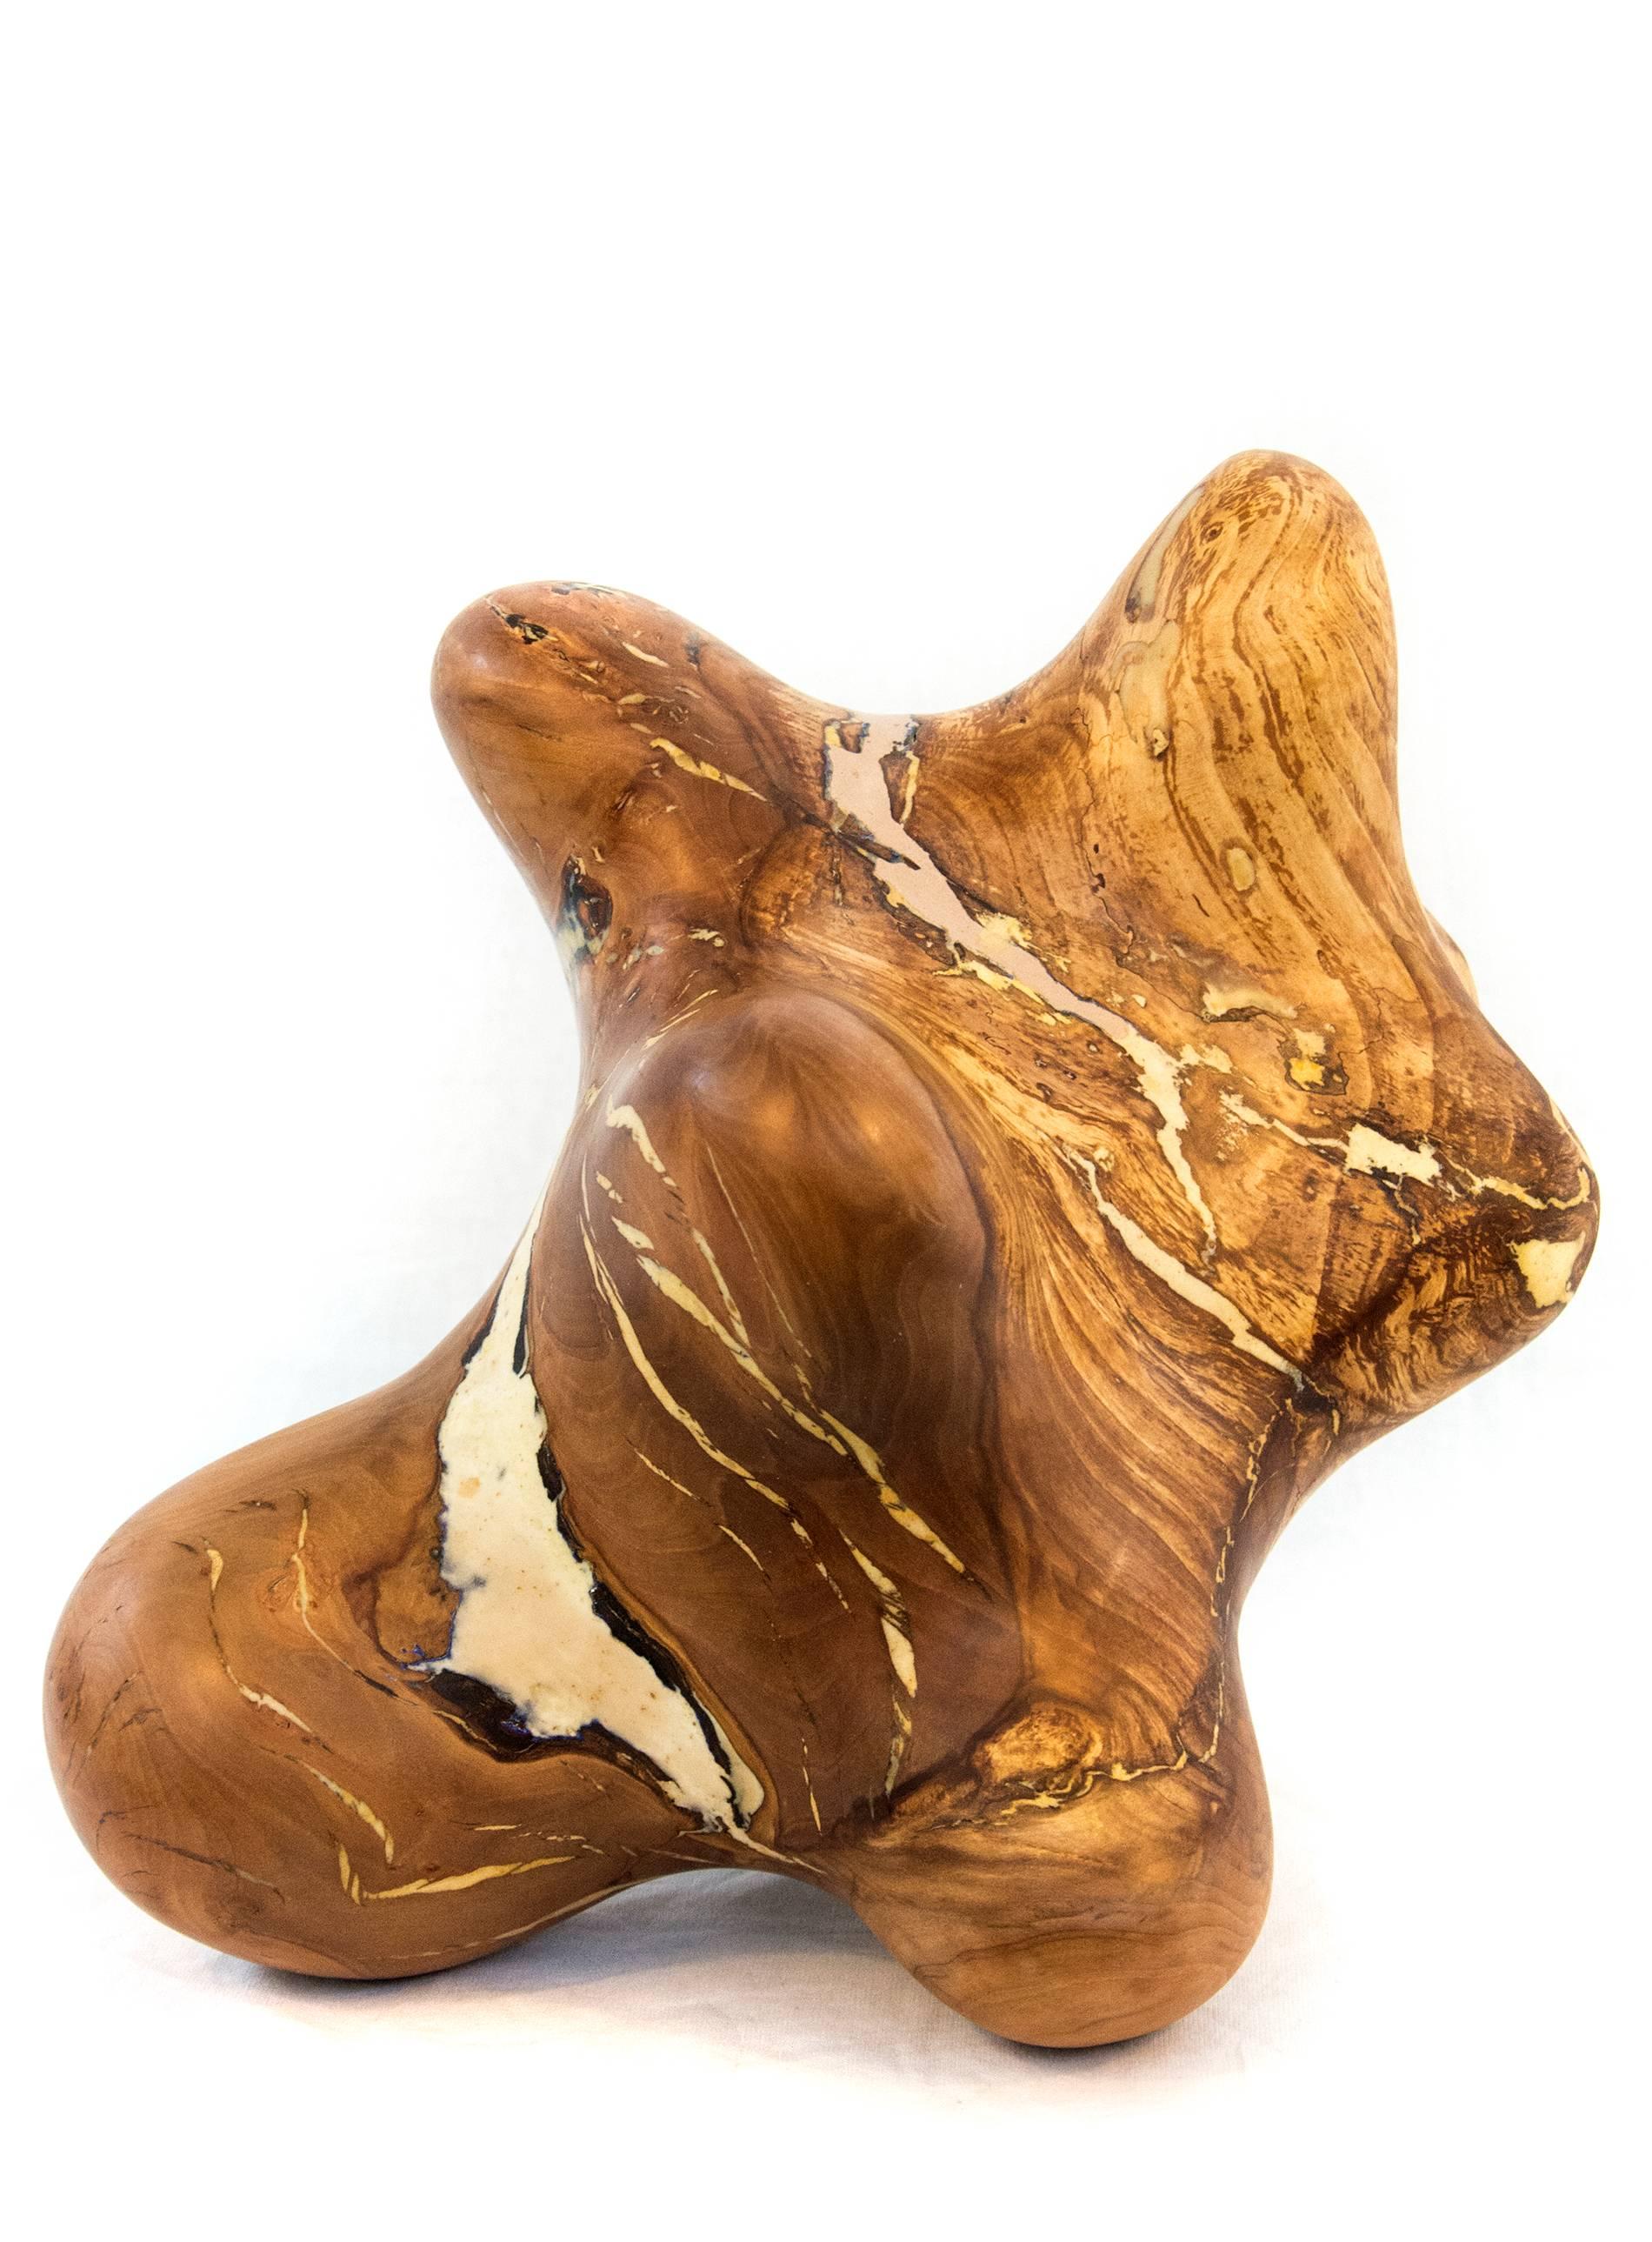 Windfall Series No 06 - smooth, polished, natural wood abstract carved sculpture - Sculpture by Shayne Dark